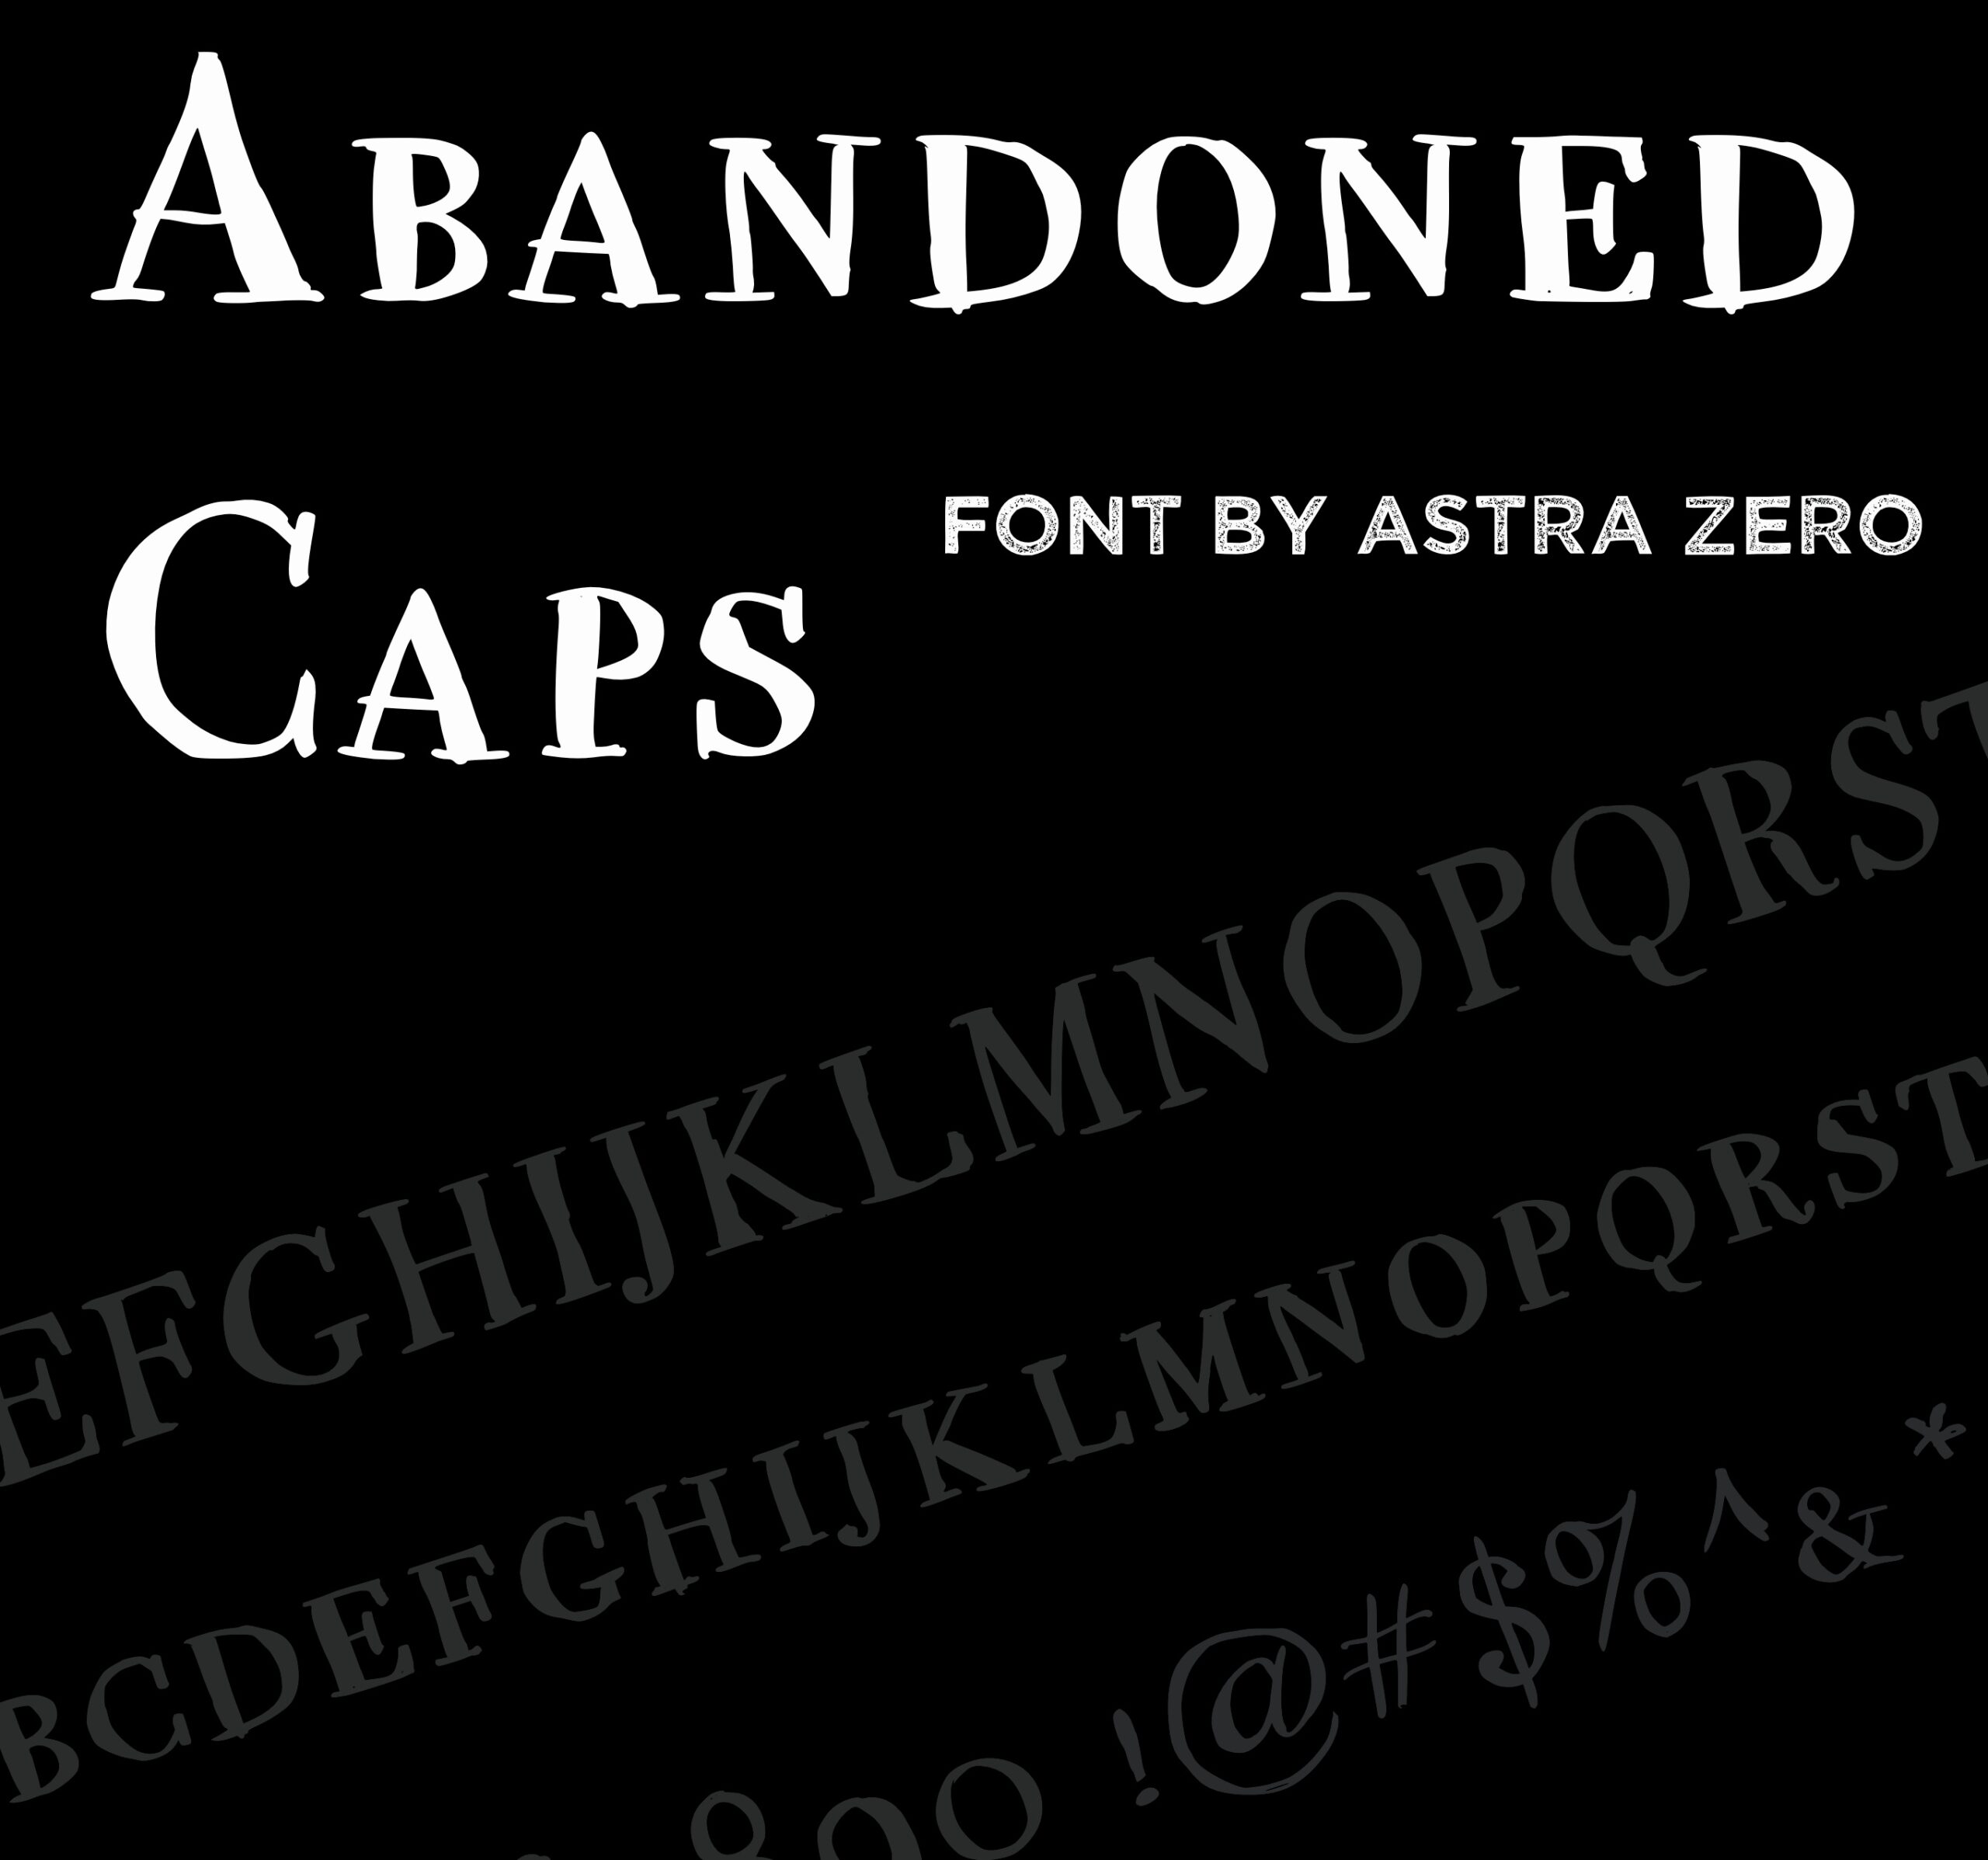 Featured image for “Abandoned Caps - FONT”